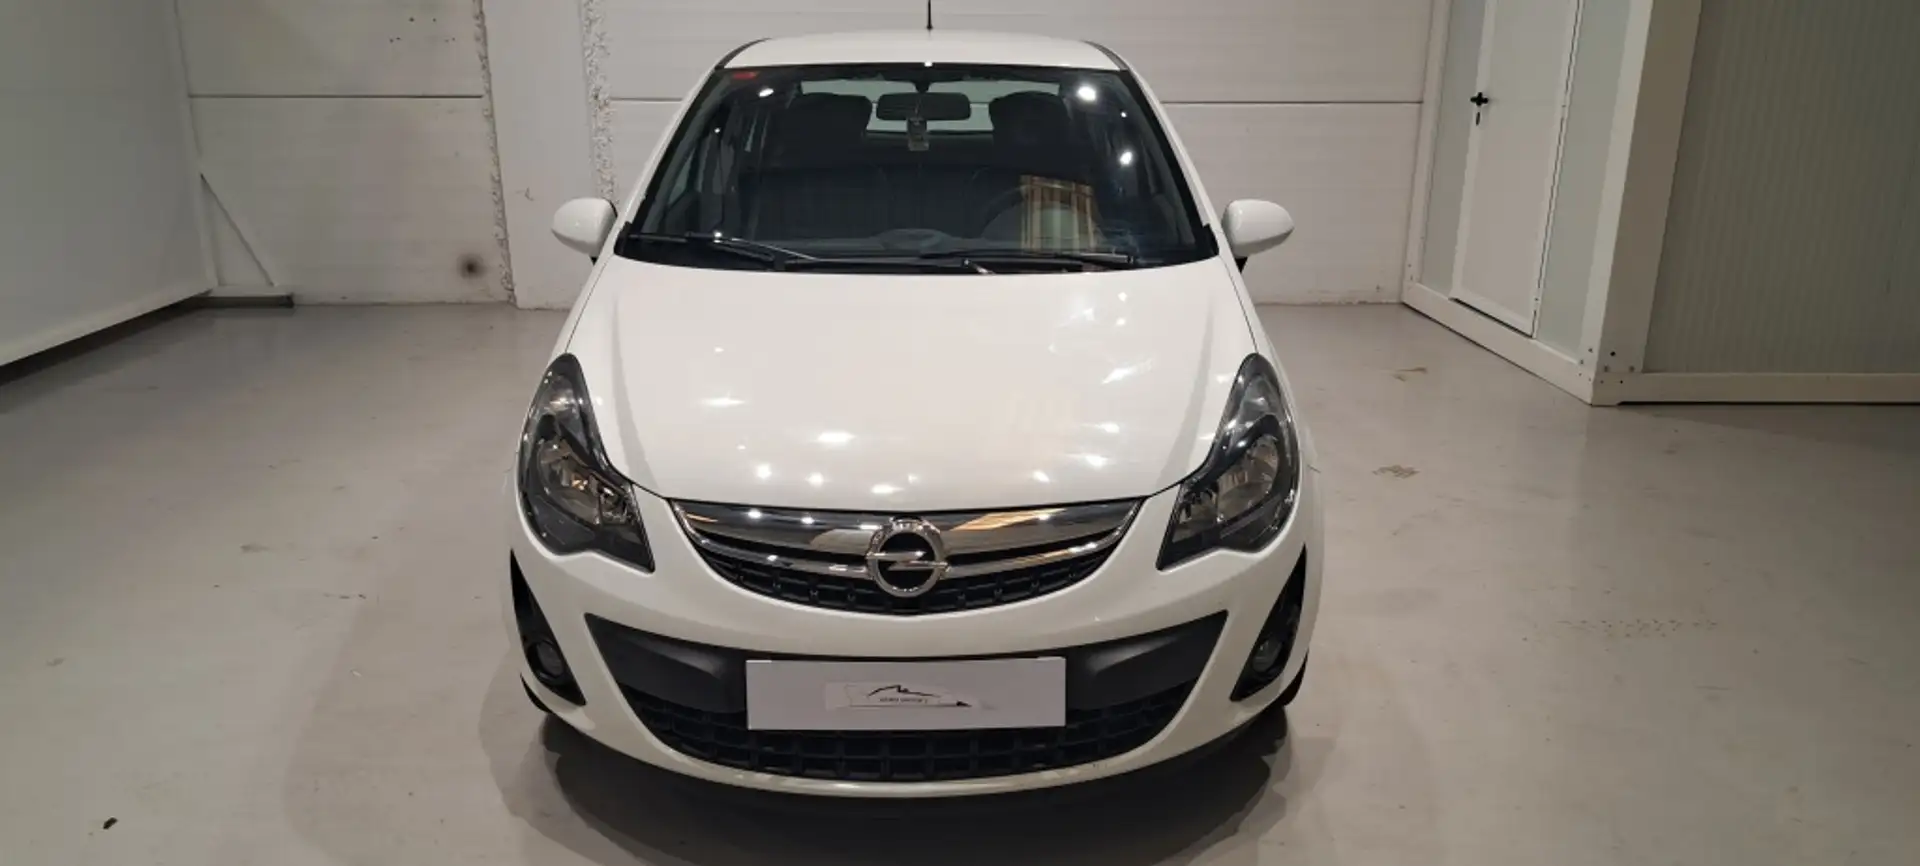 Opel Corsa 1.4 Color Edition S&S (4.75) Weiß - 2